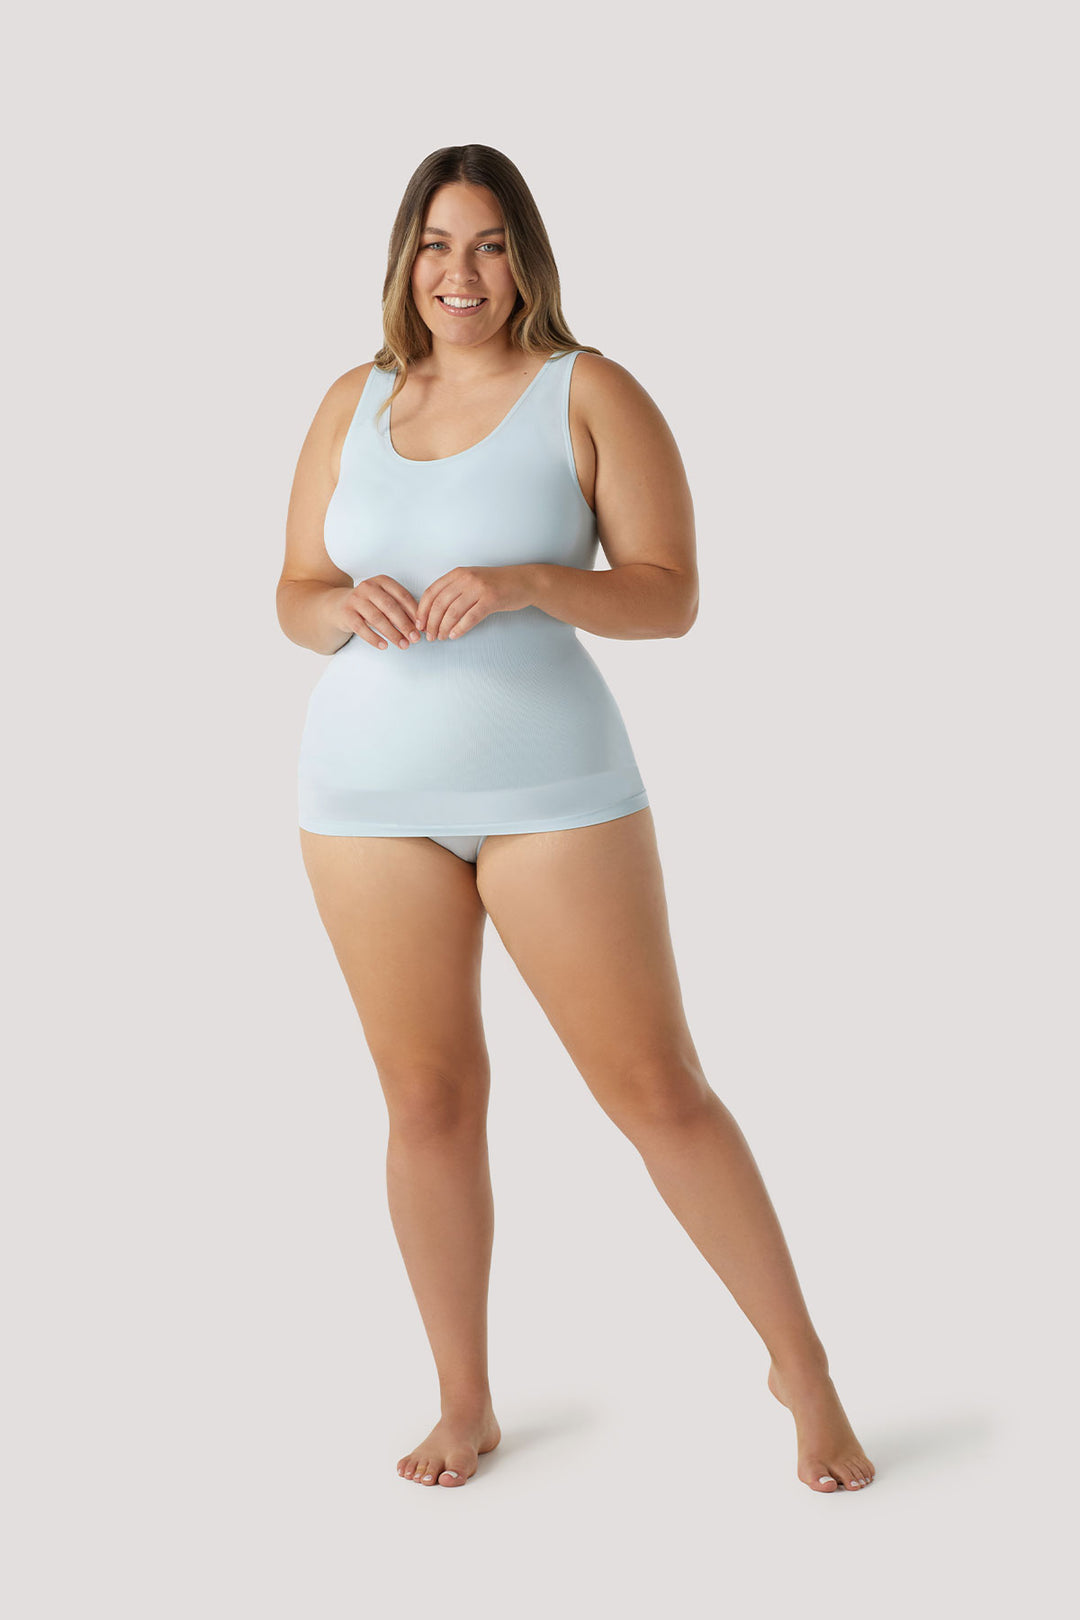 Women's comfortable Reversible Neckline, shaping and firming cami | Camyz Shapewear Smoothing Tank I Bella Bodies Australia I Ice Blue